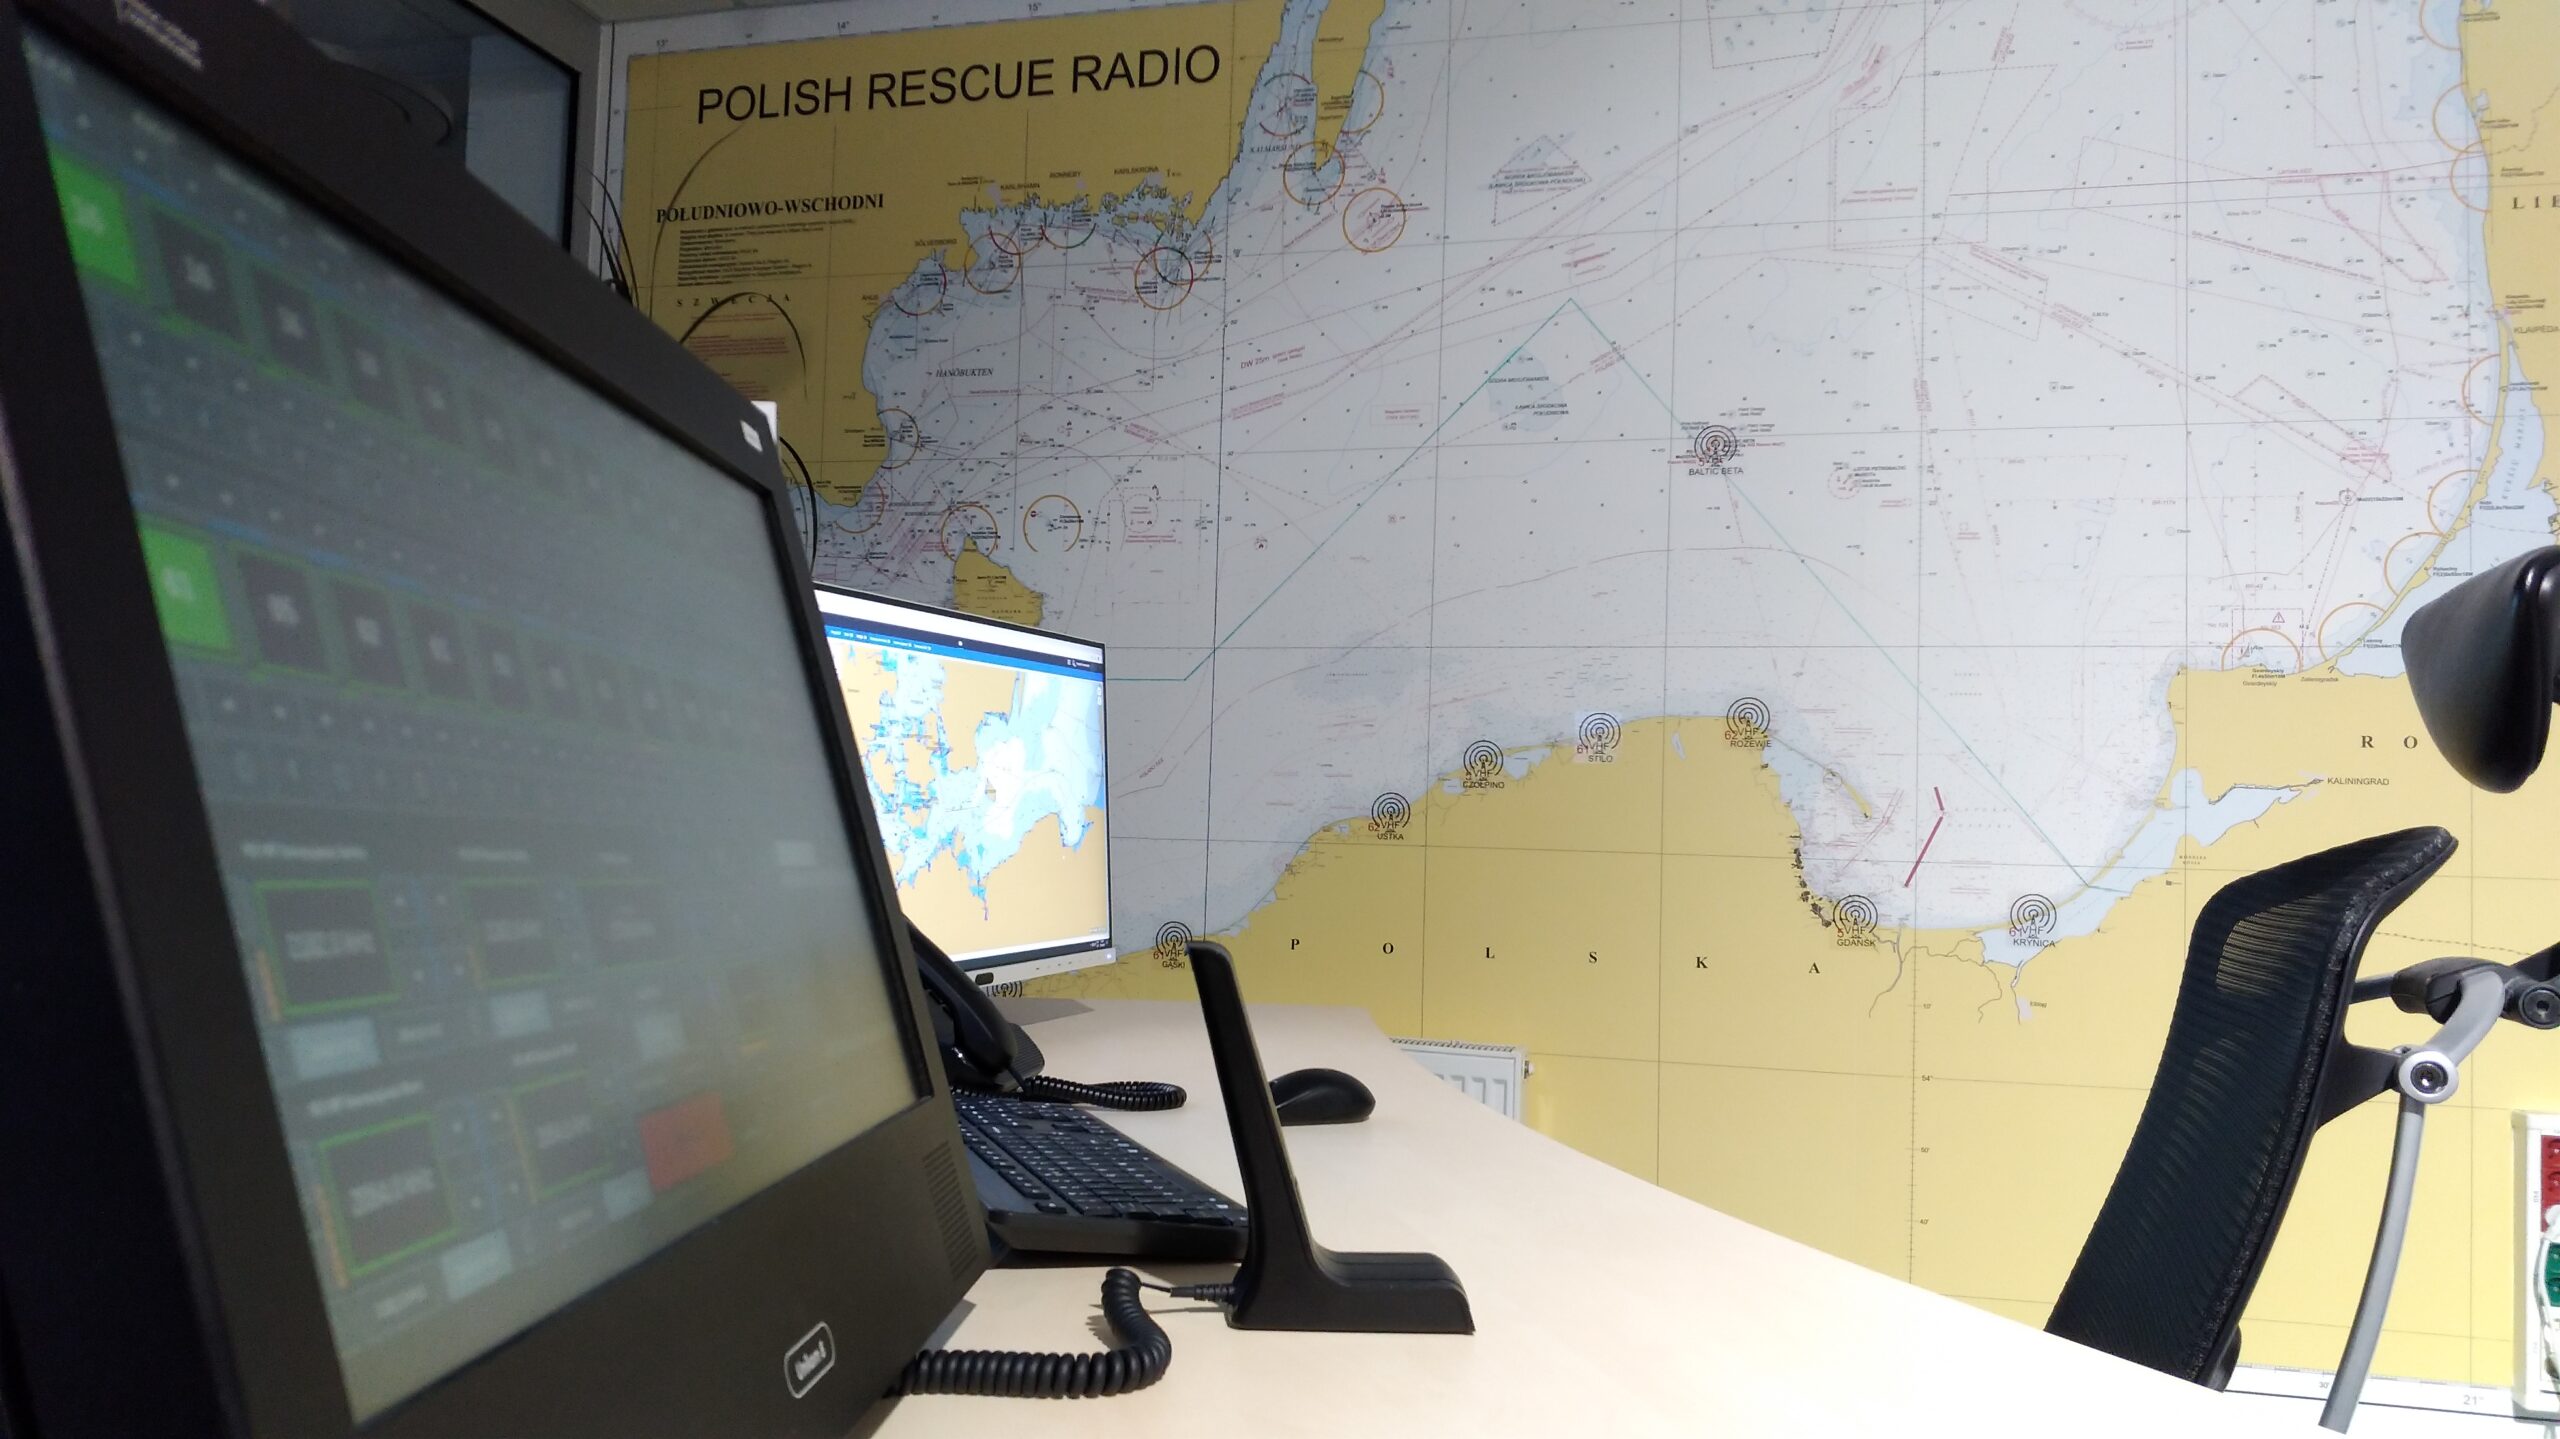 Polish Rescue Radio operator's workplace. On the wall, there is a large navigational map of the Polish coast with the location of radio stations, their frequencies and bands. A fragment of the desk. There are two black computer monitors, a black keyboard, a black telephone and a black microphone on the table top. On the screen of the closer monitor you can see the icons of the individual radio stations allowing you to select stations, frequencies and other functions. The second monitor displays an application for identifying the position of ships - the map of the Baltic Sea